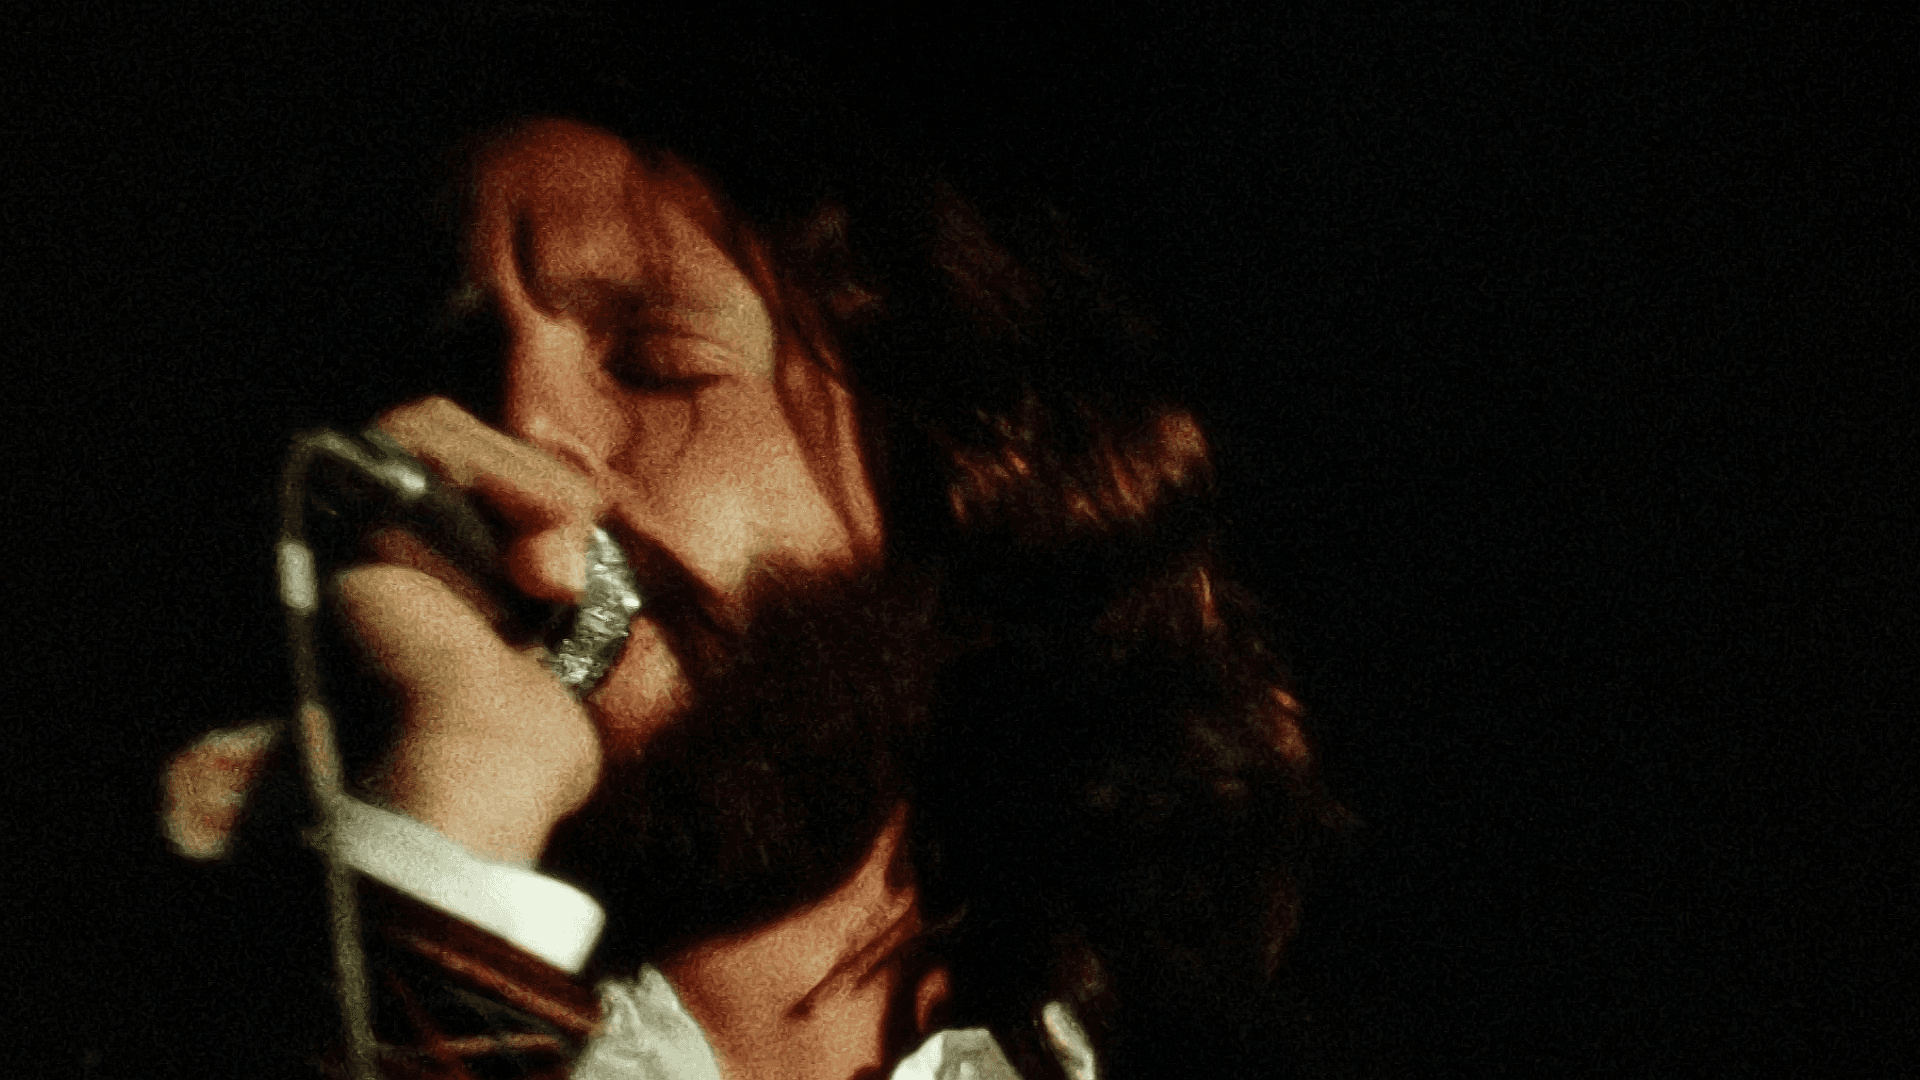 The Doors - Live at the Isle of Wight Festival 19